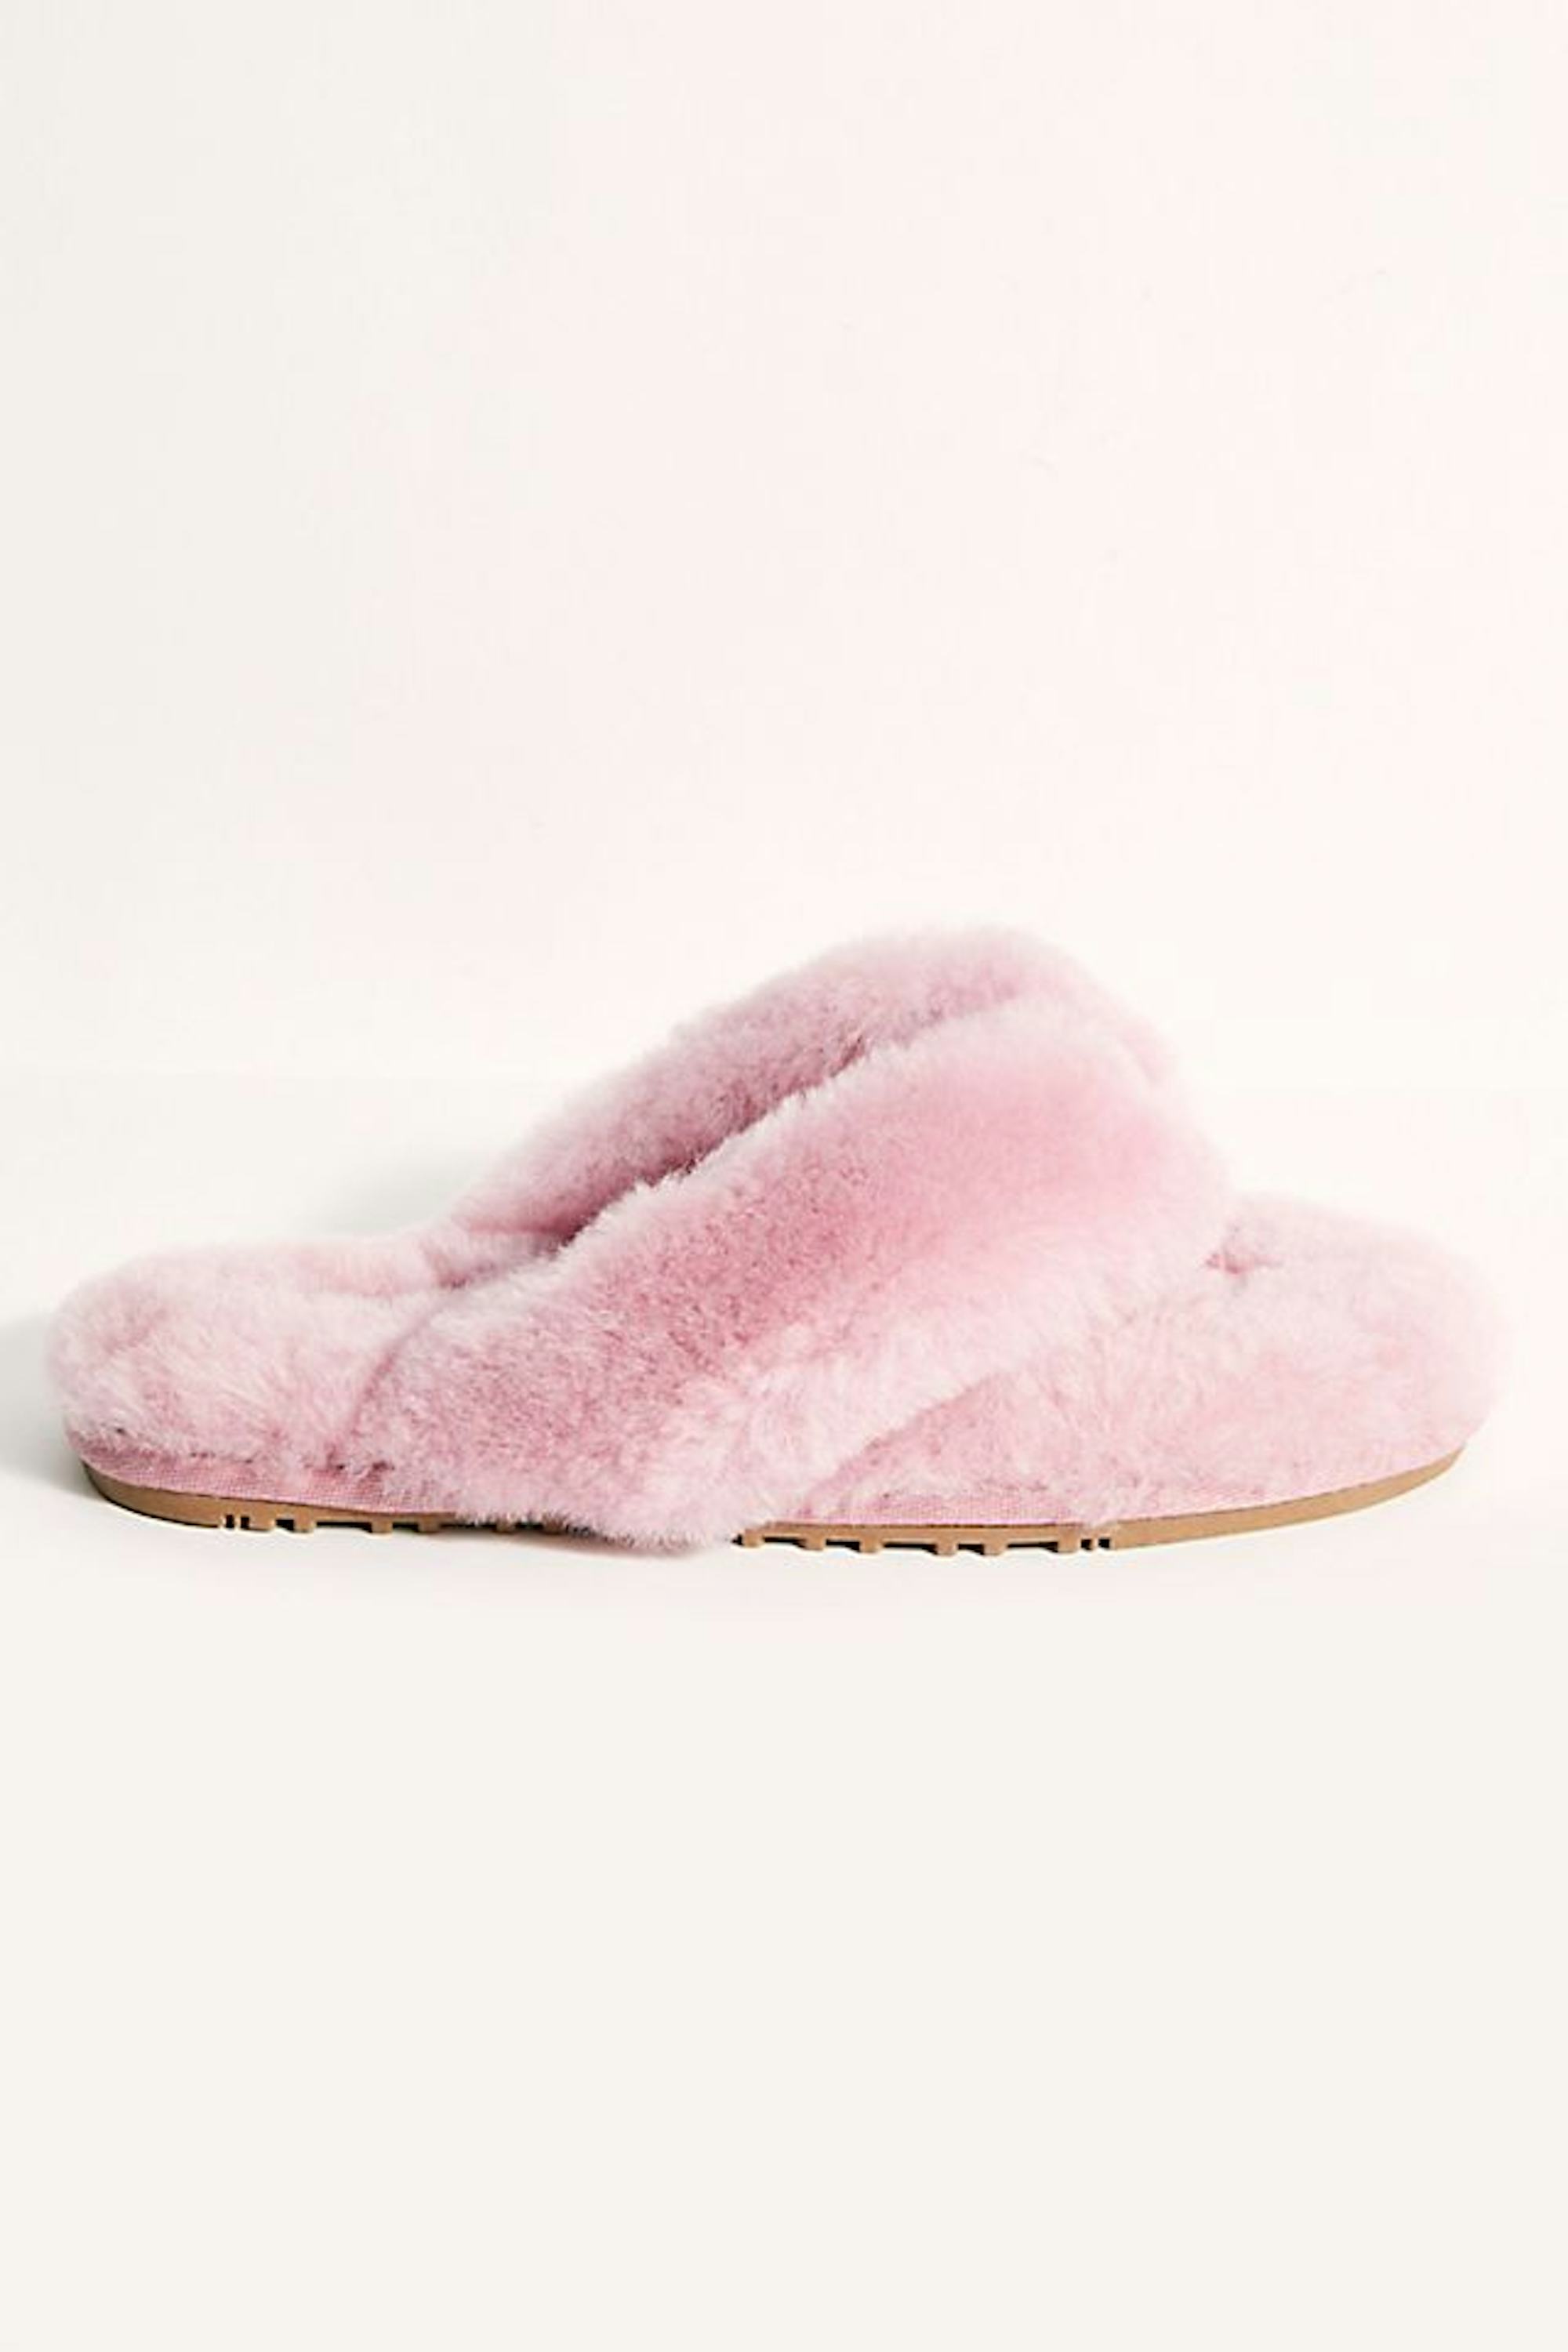 11 House Slippers That Will Make Every Indoor Outfit Look Good